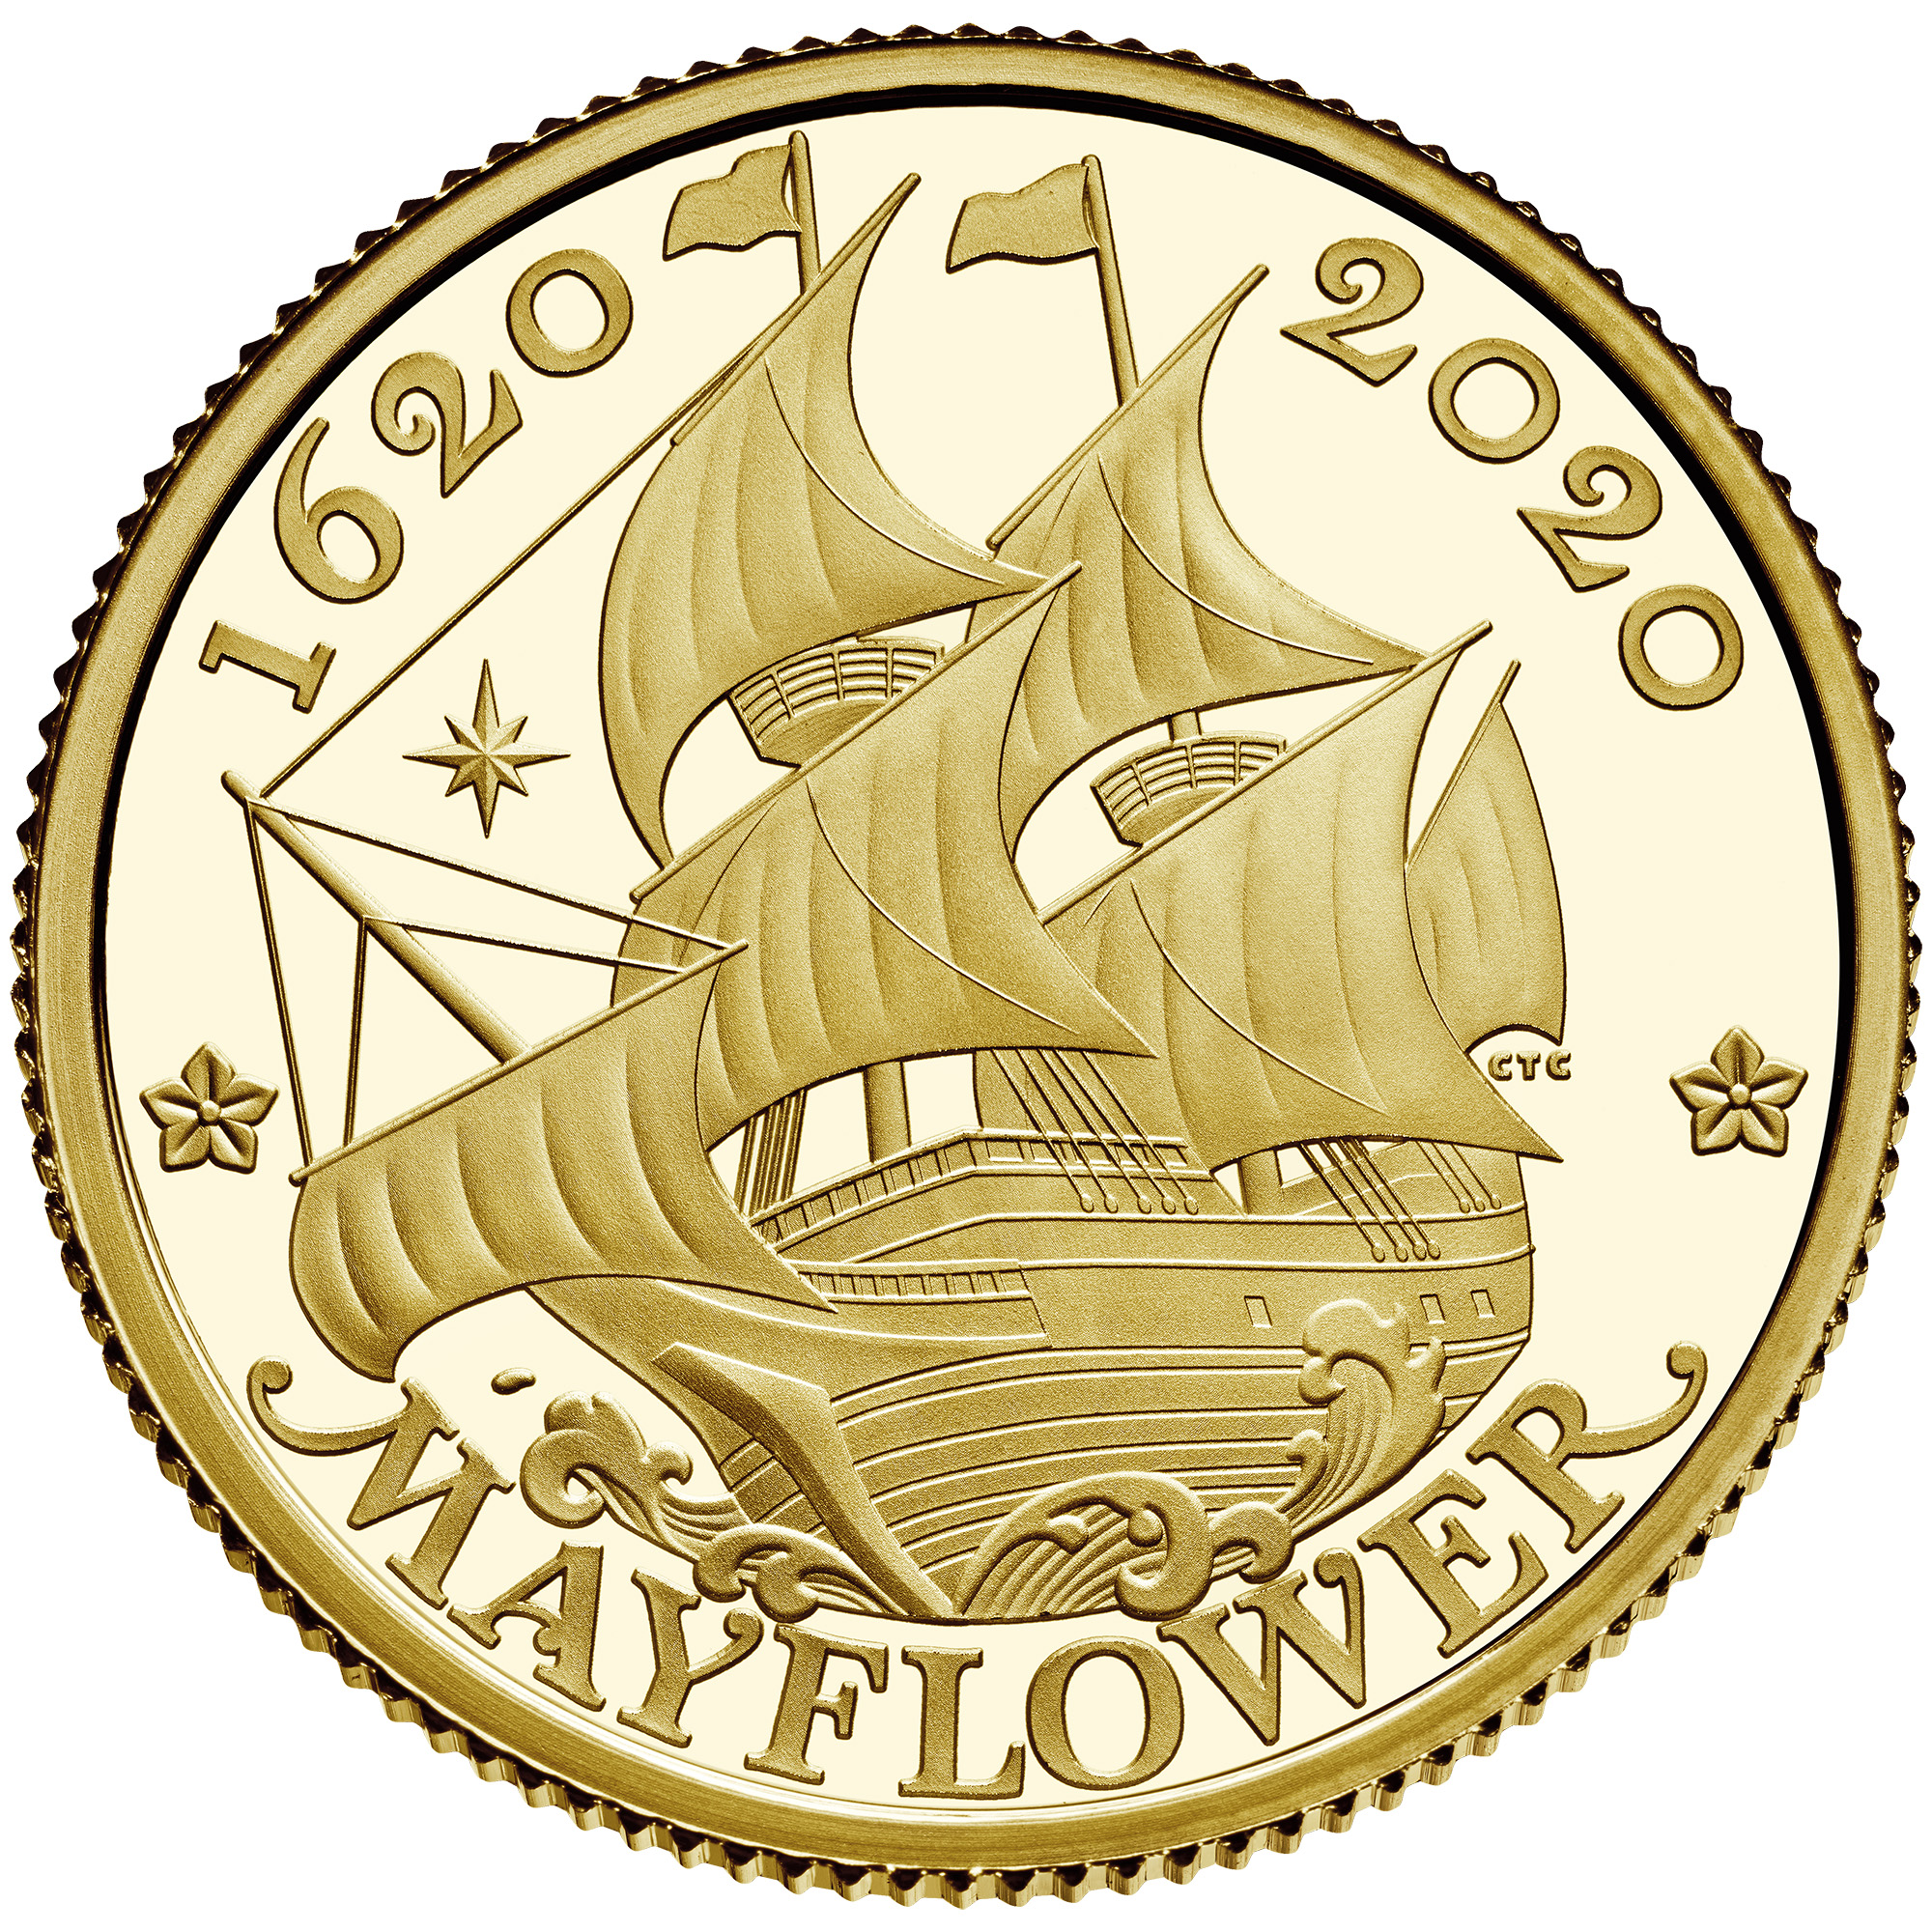 United Kingdom 2020 Mayflower 400th Anniversary Gold Proof Coin Reverse